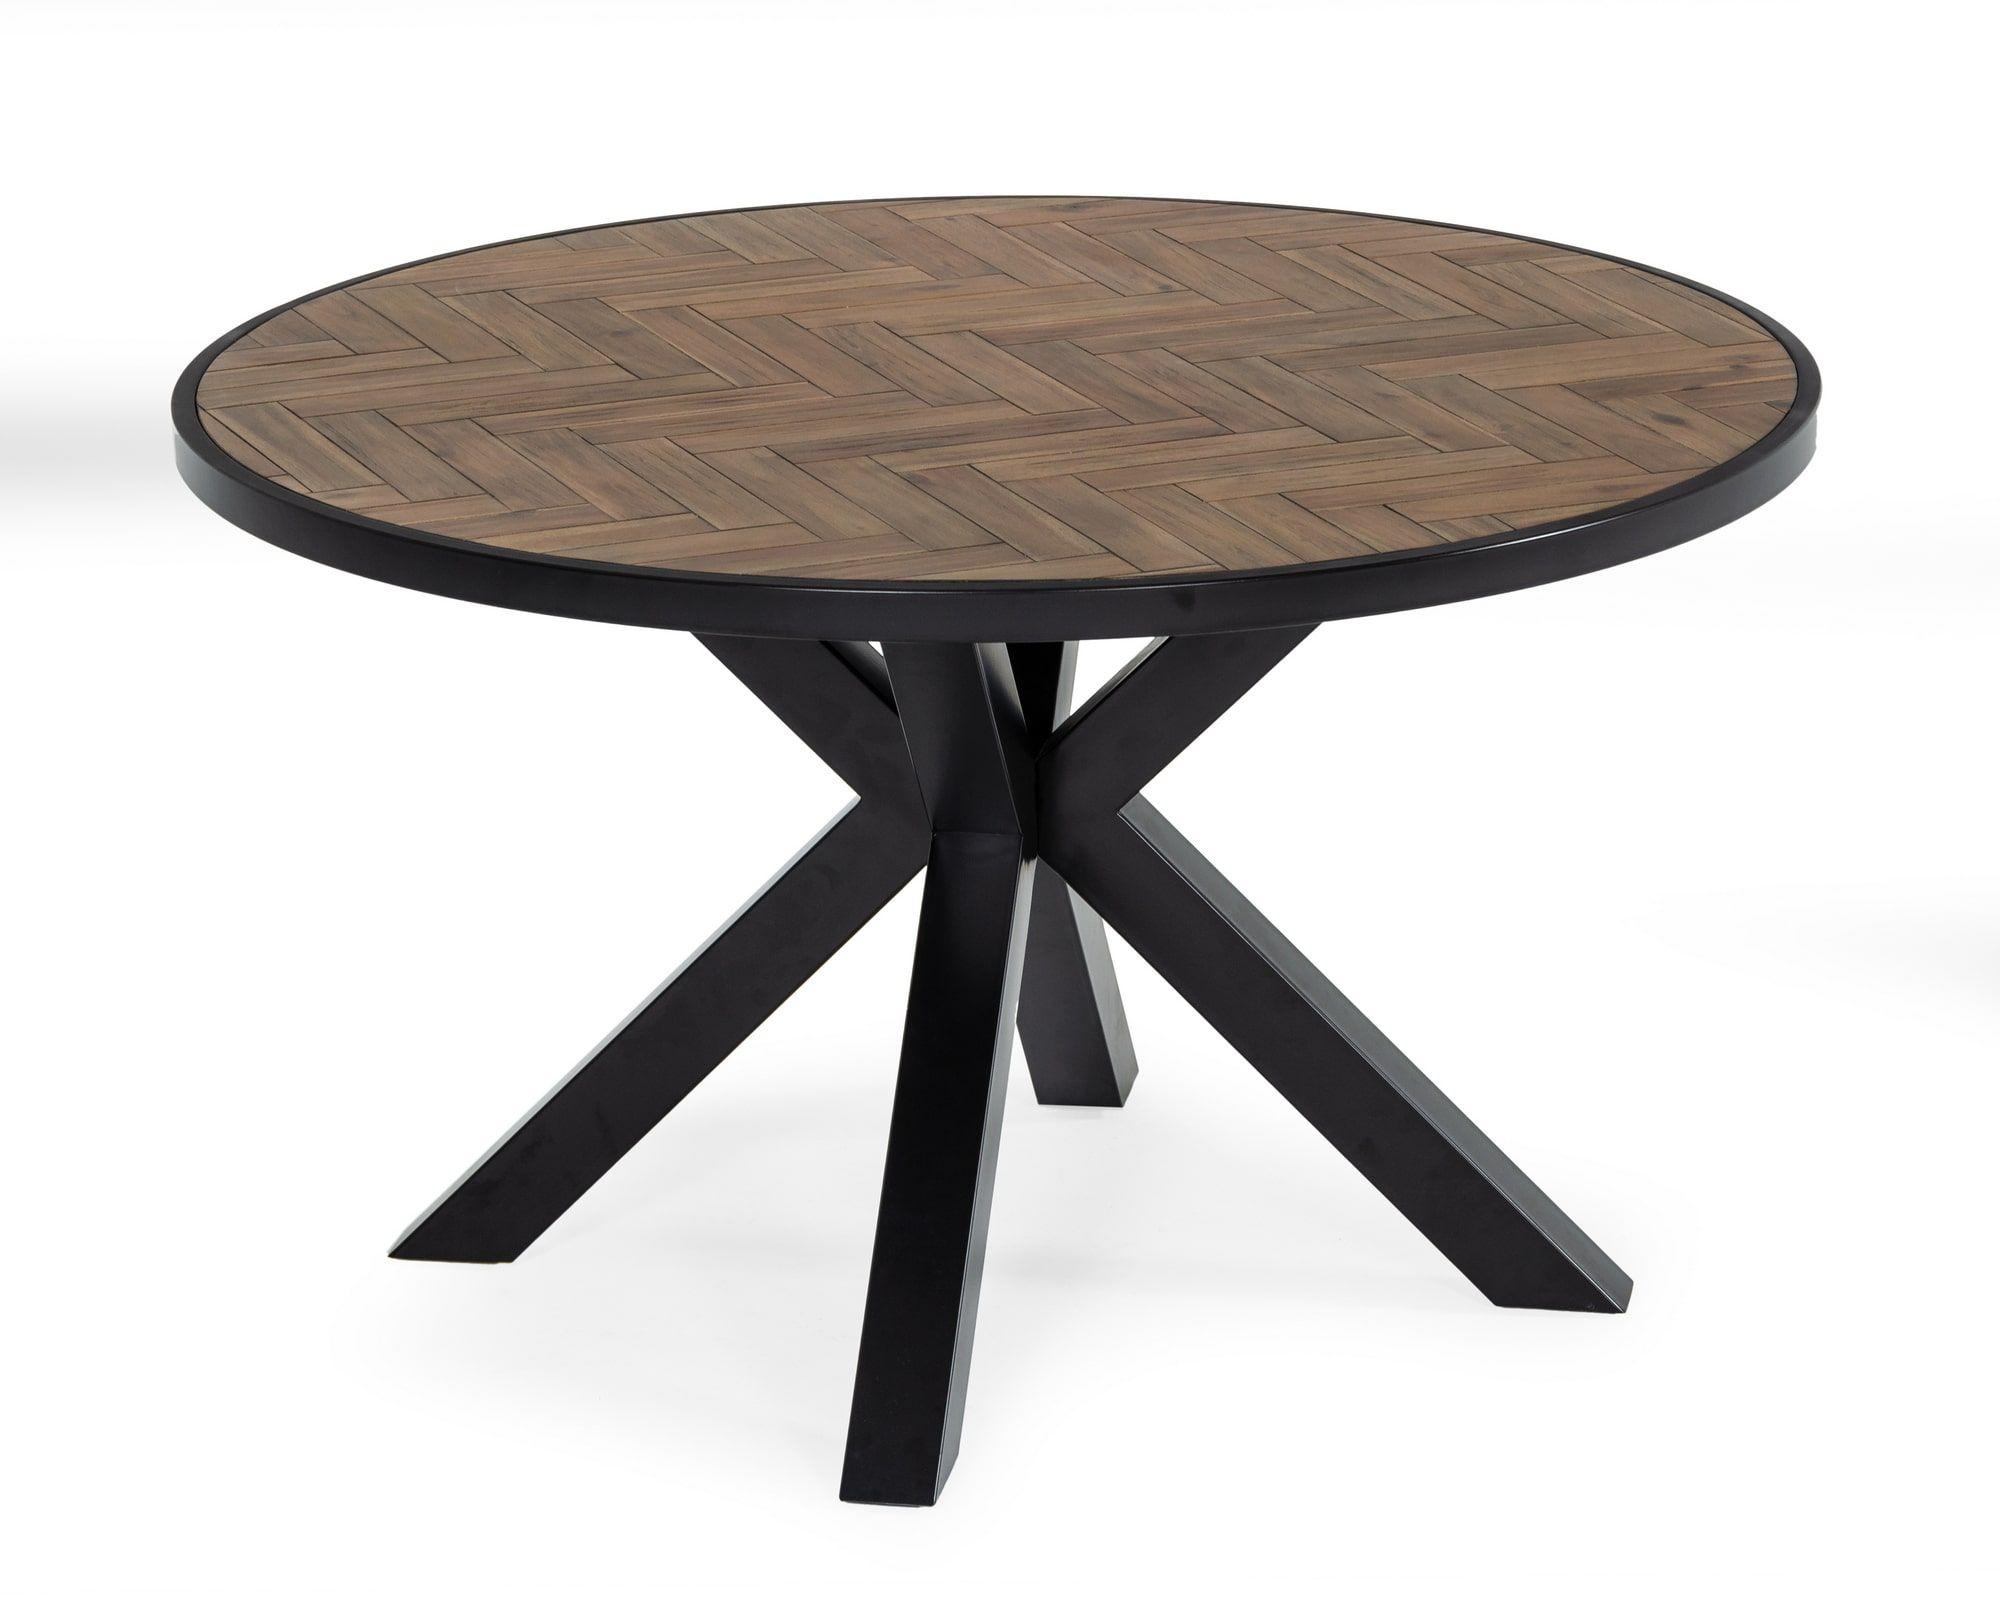 Contemporary, Modern Dining Table Pasada VGWH183720501 in Brown, Black 